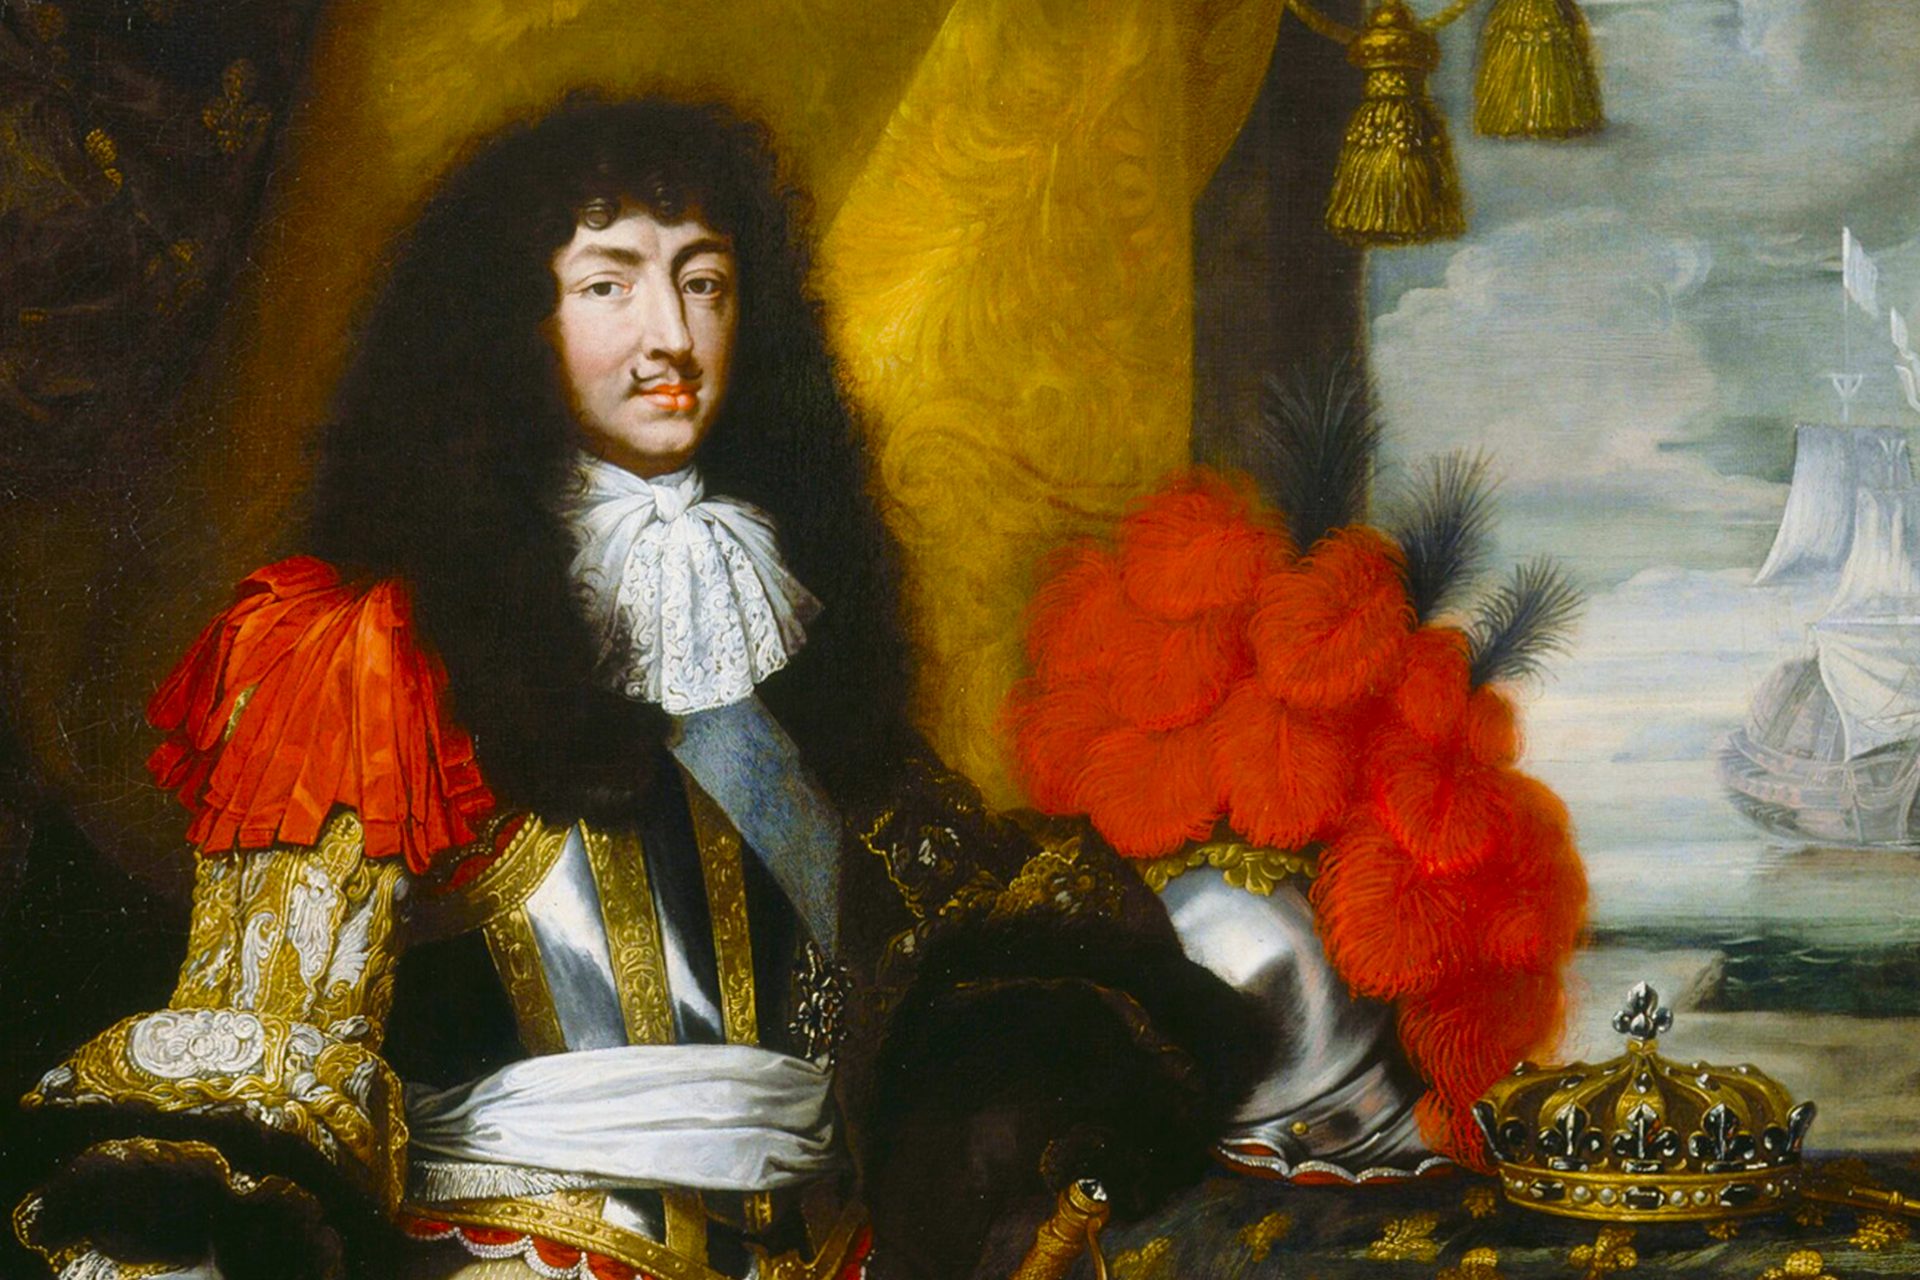 Portrait of louis xiv playing harpsichord in a vibrant shirt